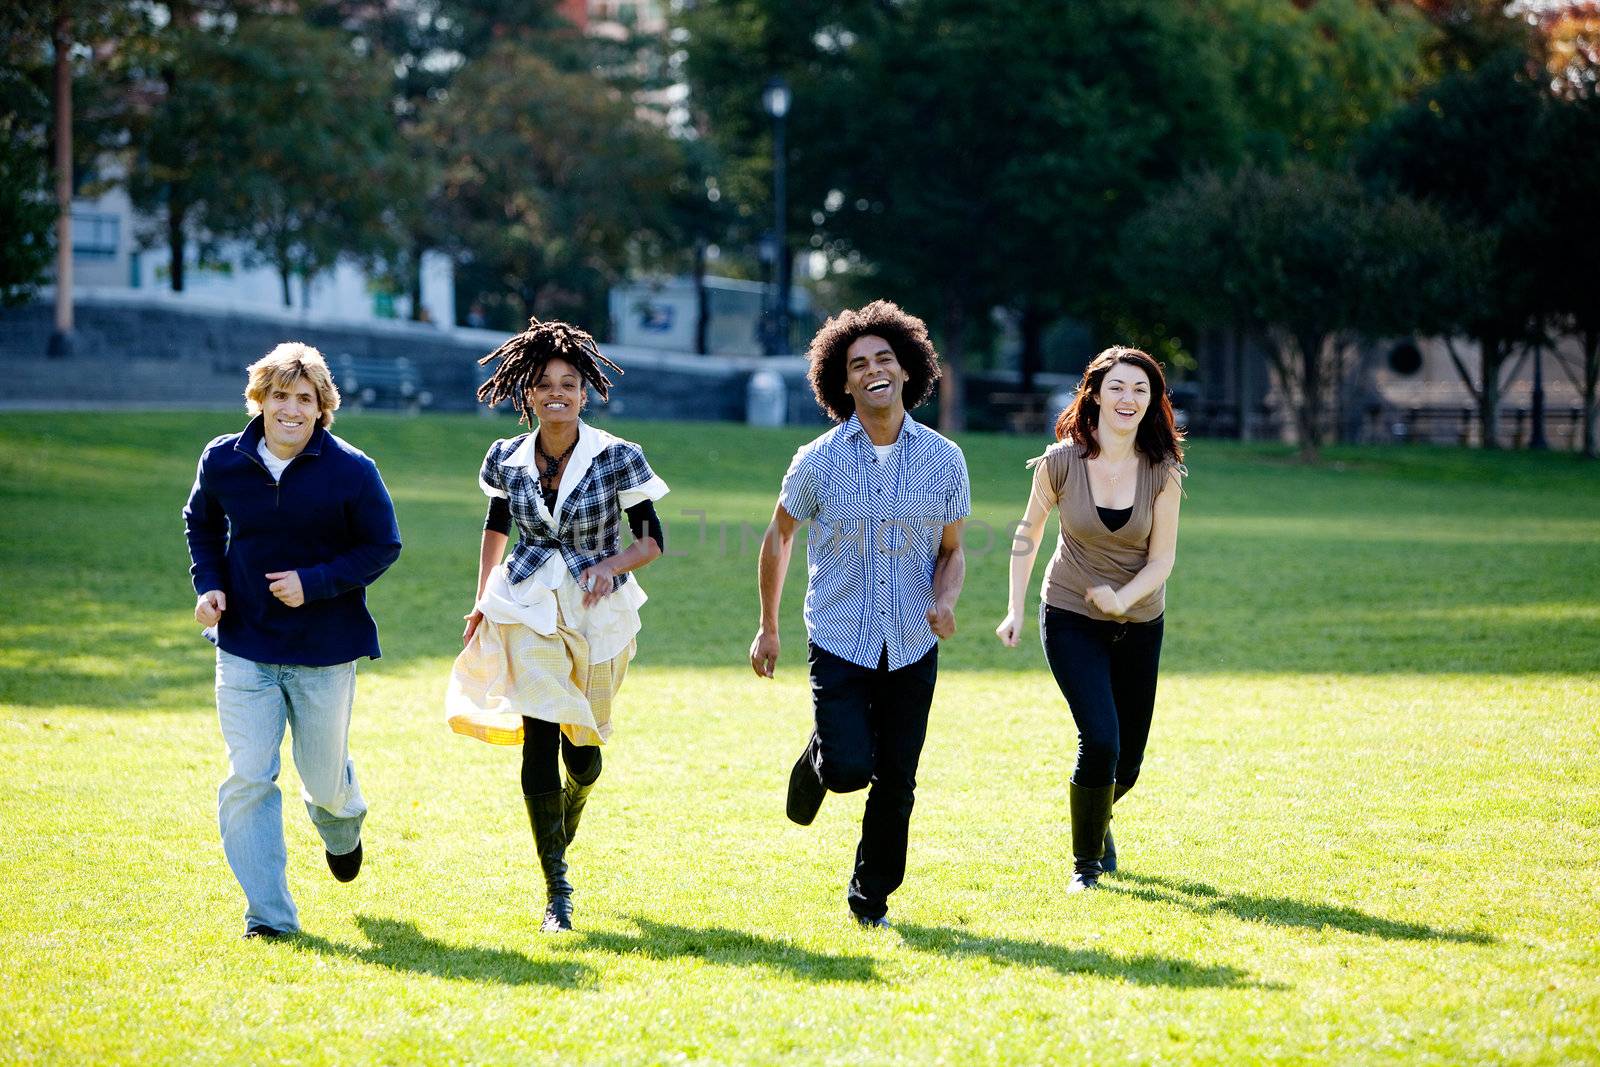 A group of people in a park, running towards the camera